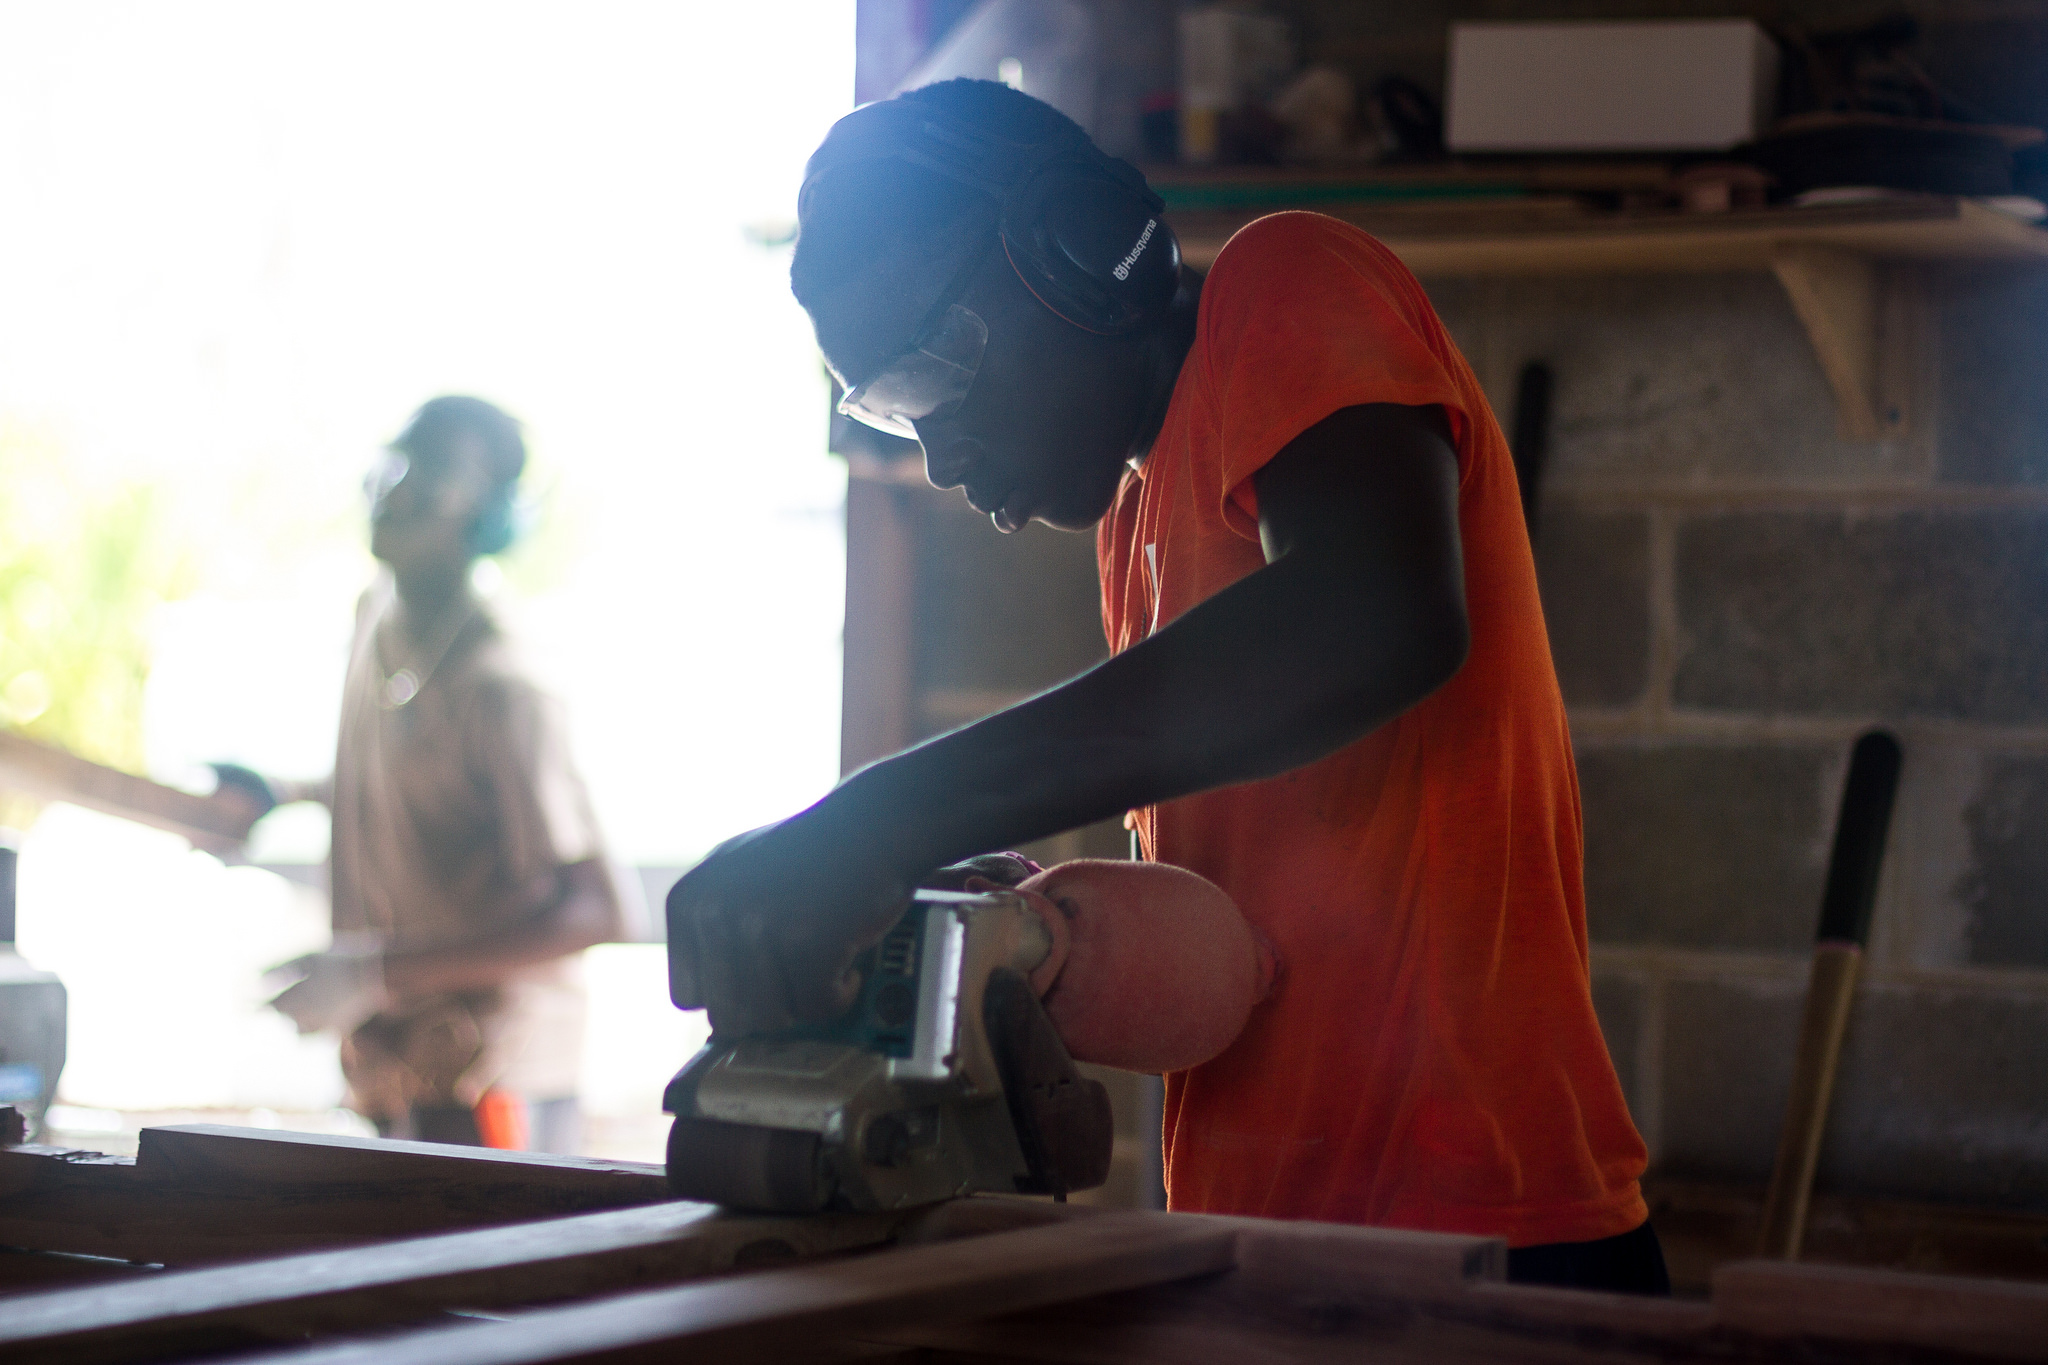 The woodshop is part of the Center for Sustainable Development, which is one of the locations on campus where participants are mentored. 